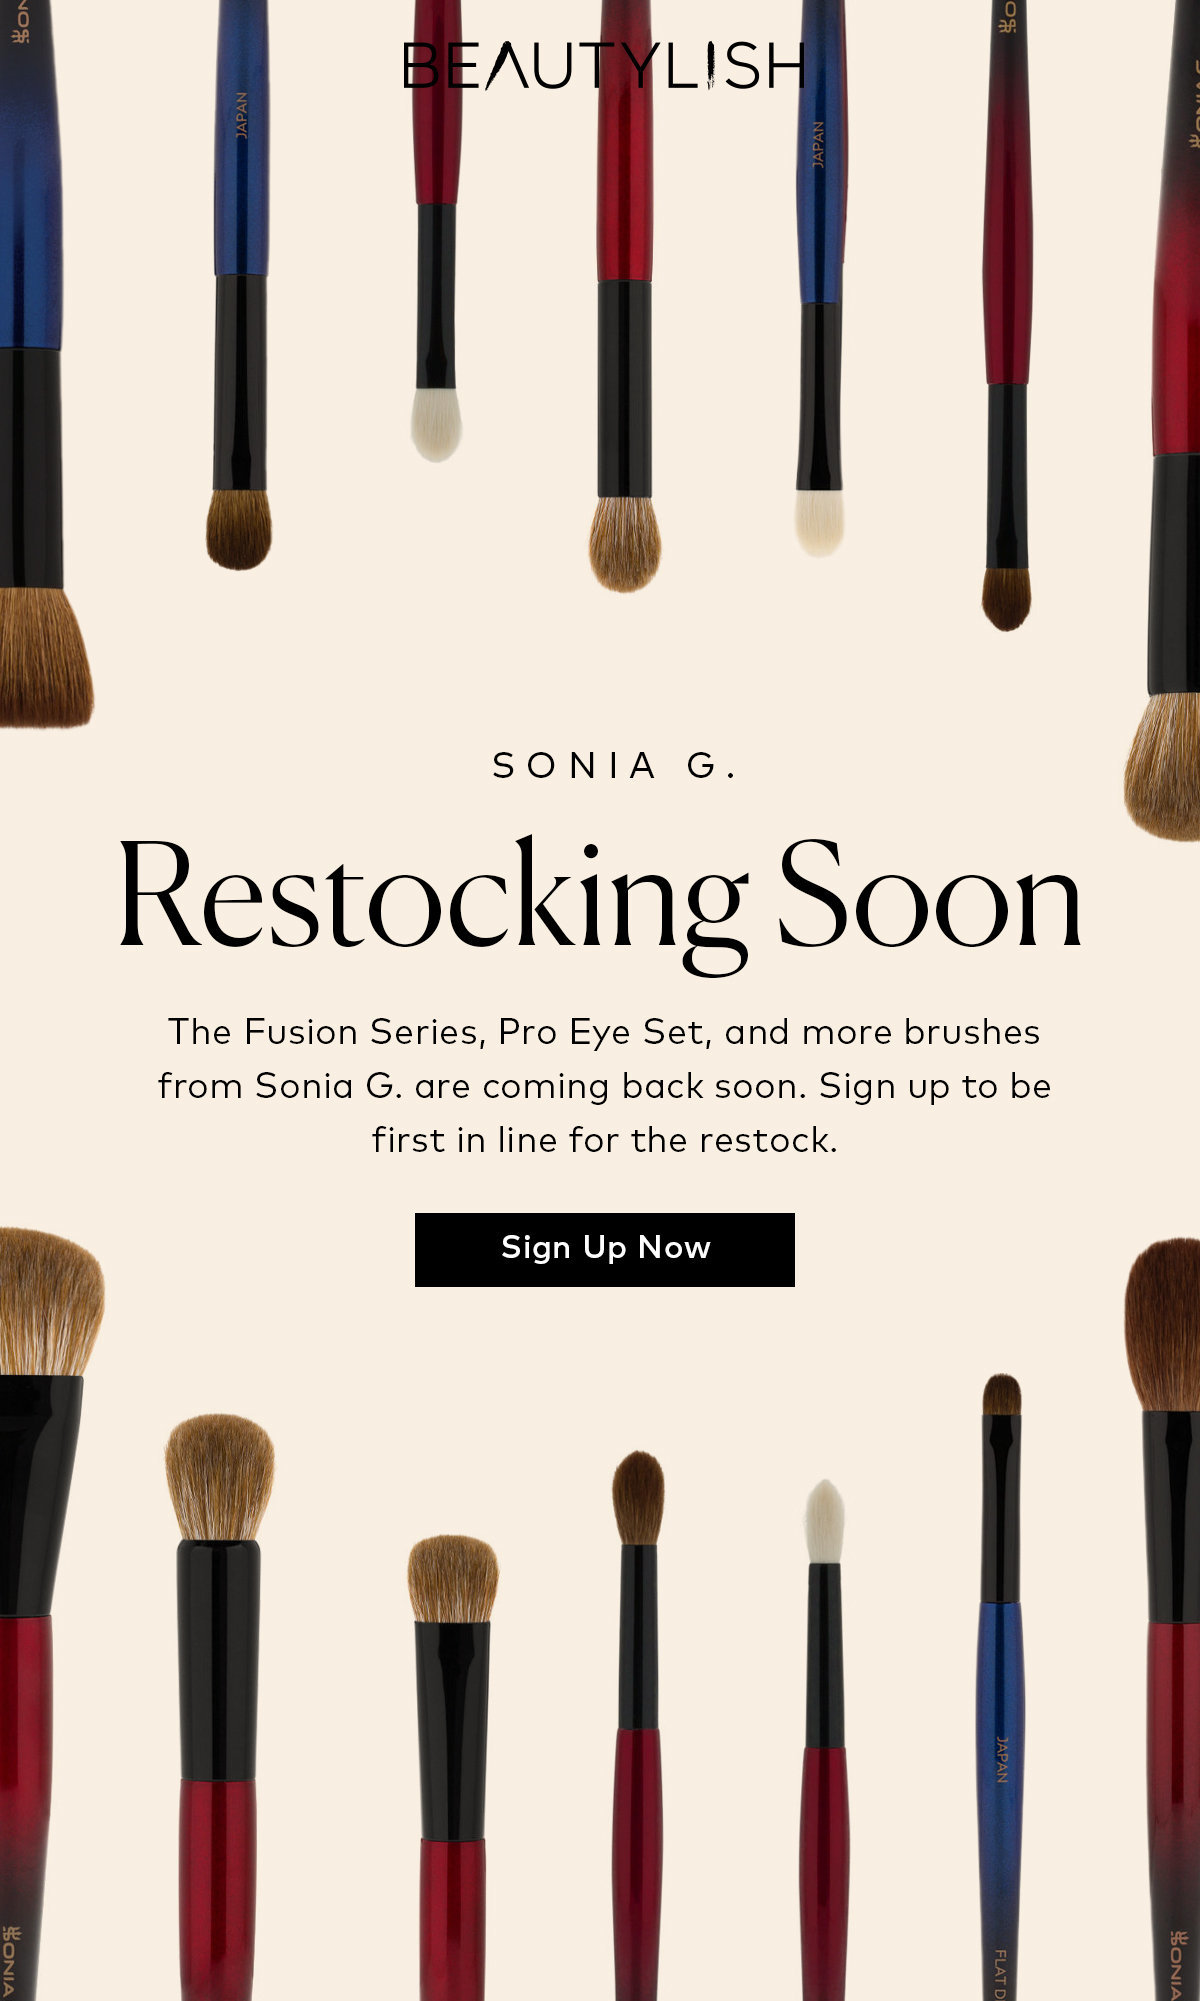 1 SONIA G. Restocking Soon The Fusion Series, Pro Eye Set, and more brushes from Sonia G. are coming back soon. Sign up to be first in line for the restock. Sign Up Now 